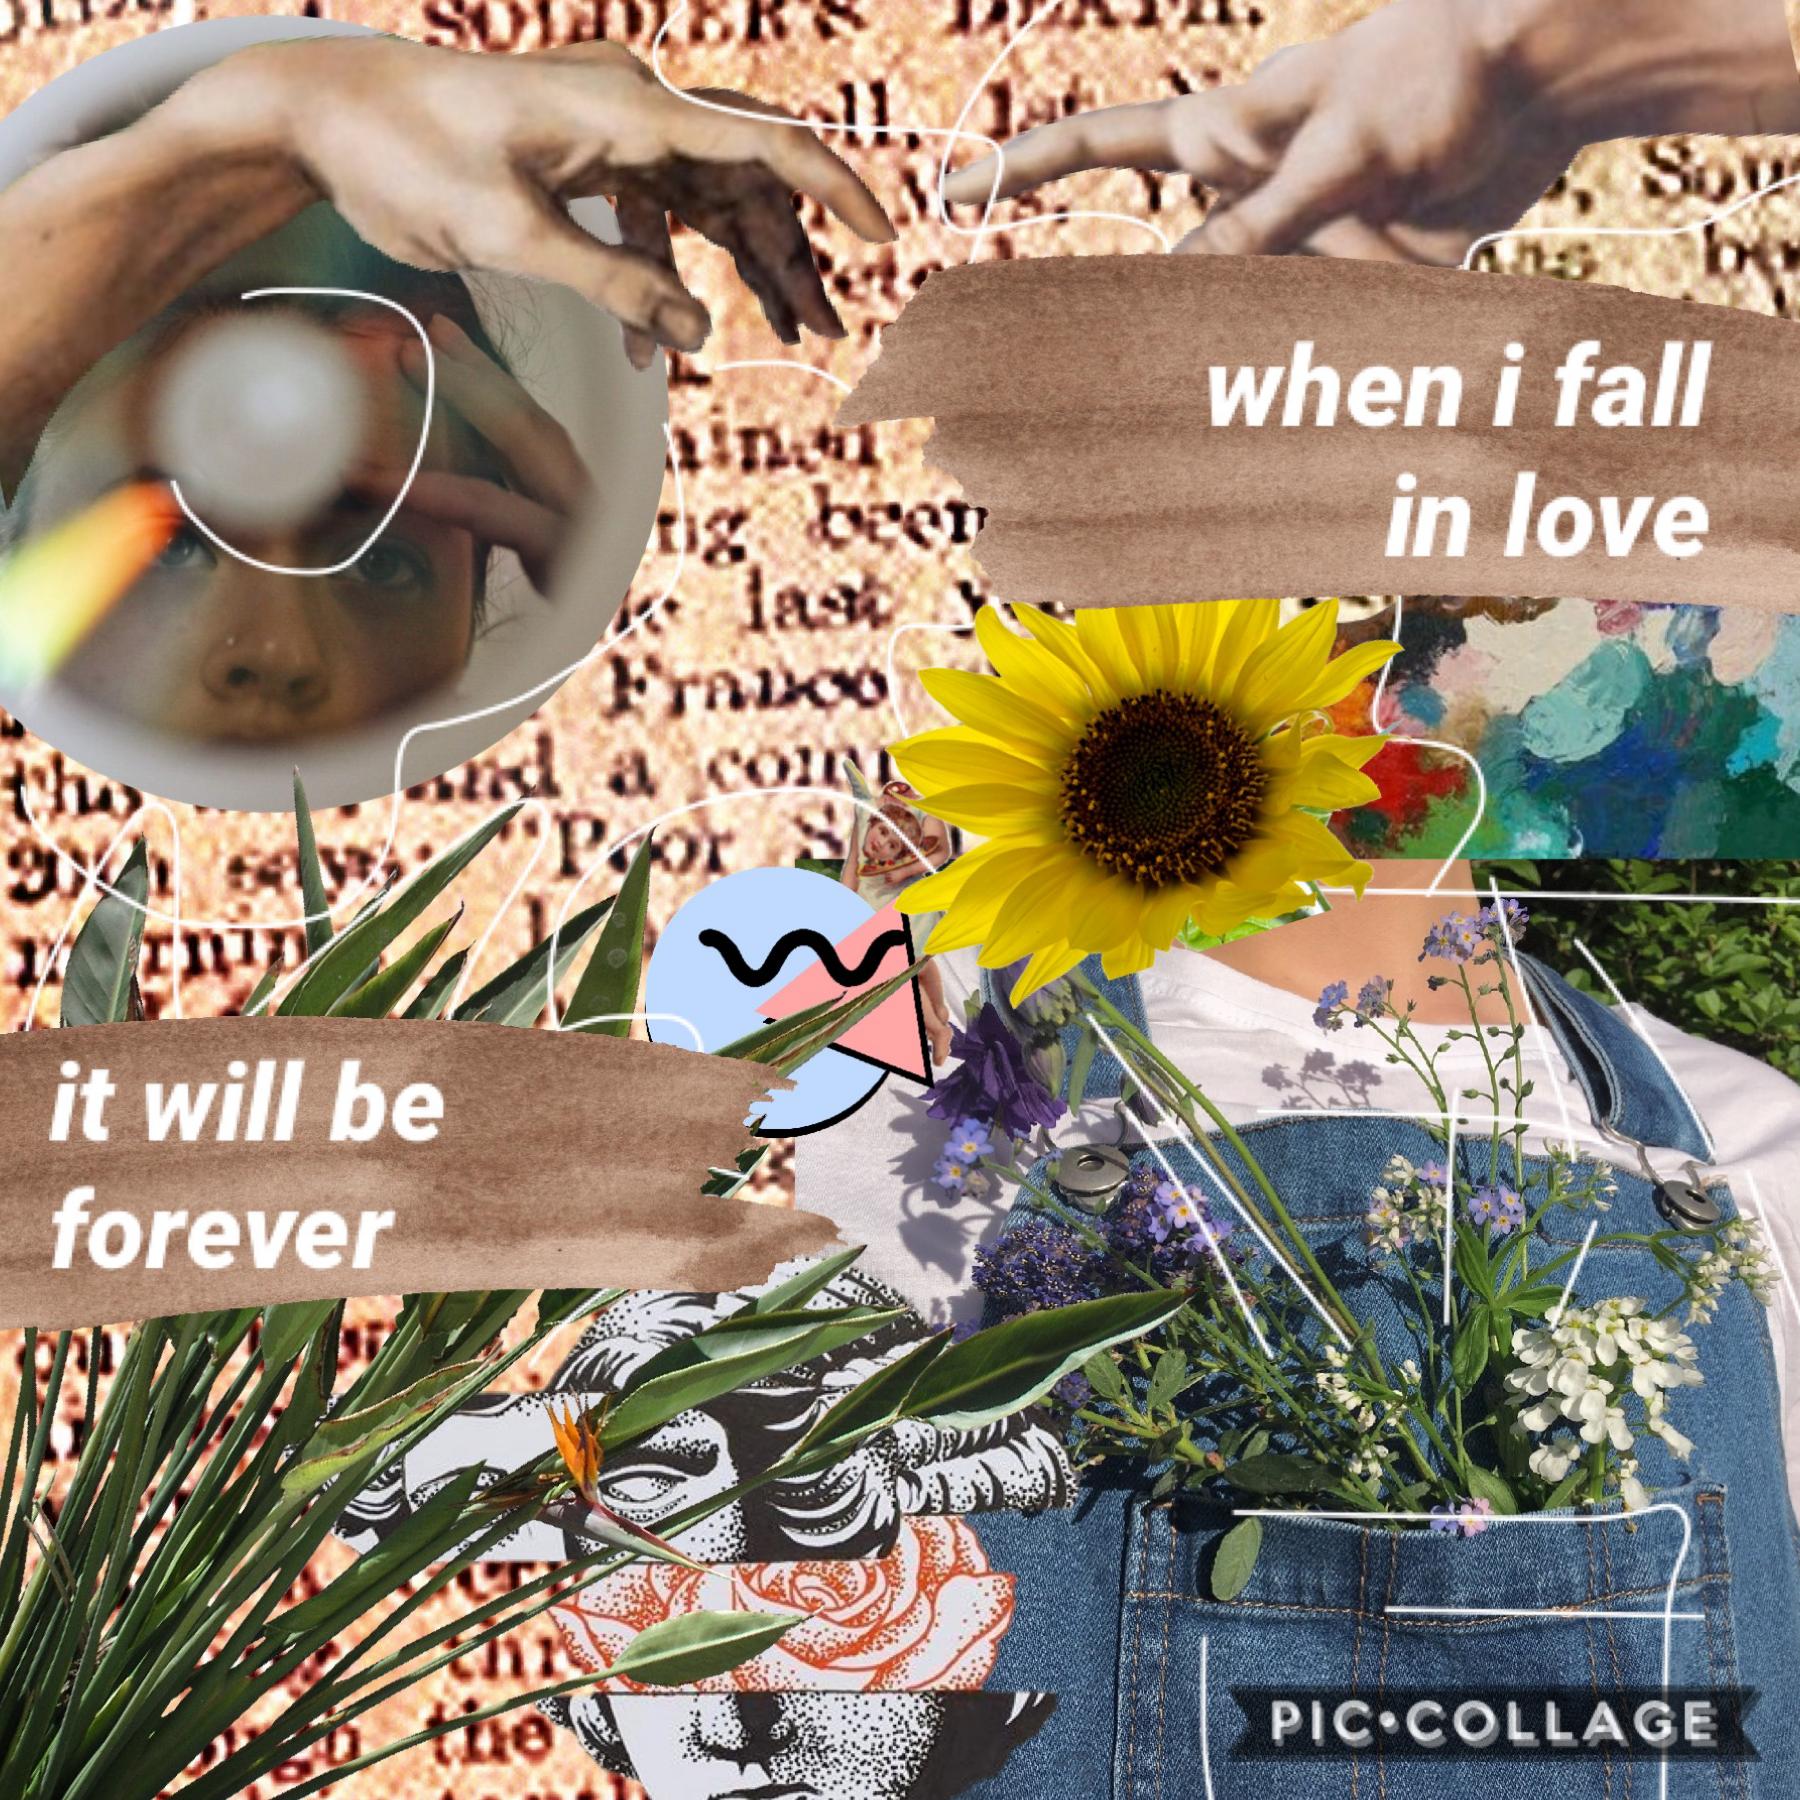 🧚🏼‍♀️ tap 🧚🏼‍♀️


hi! i haven't been on here in so long

my old collages make me cringe so bad

anyway i'm back for a bit!

thanks for looking at this 💕